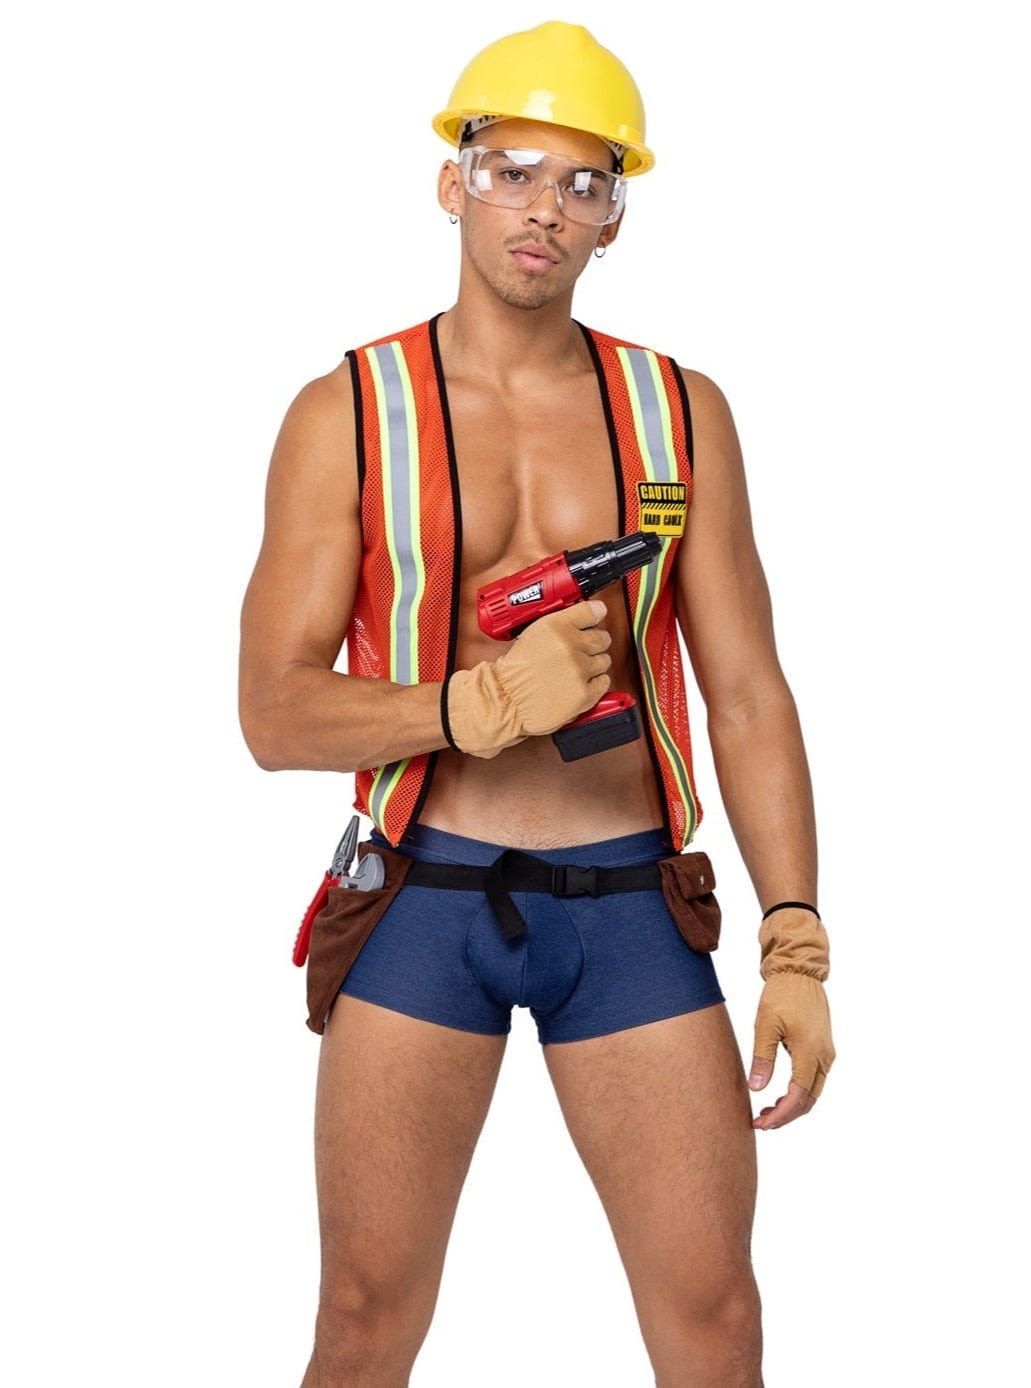 Construction Costumes in Halloween Costumes 